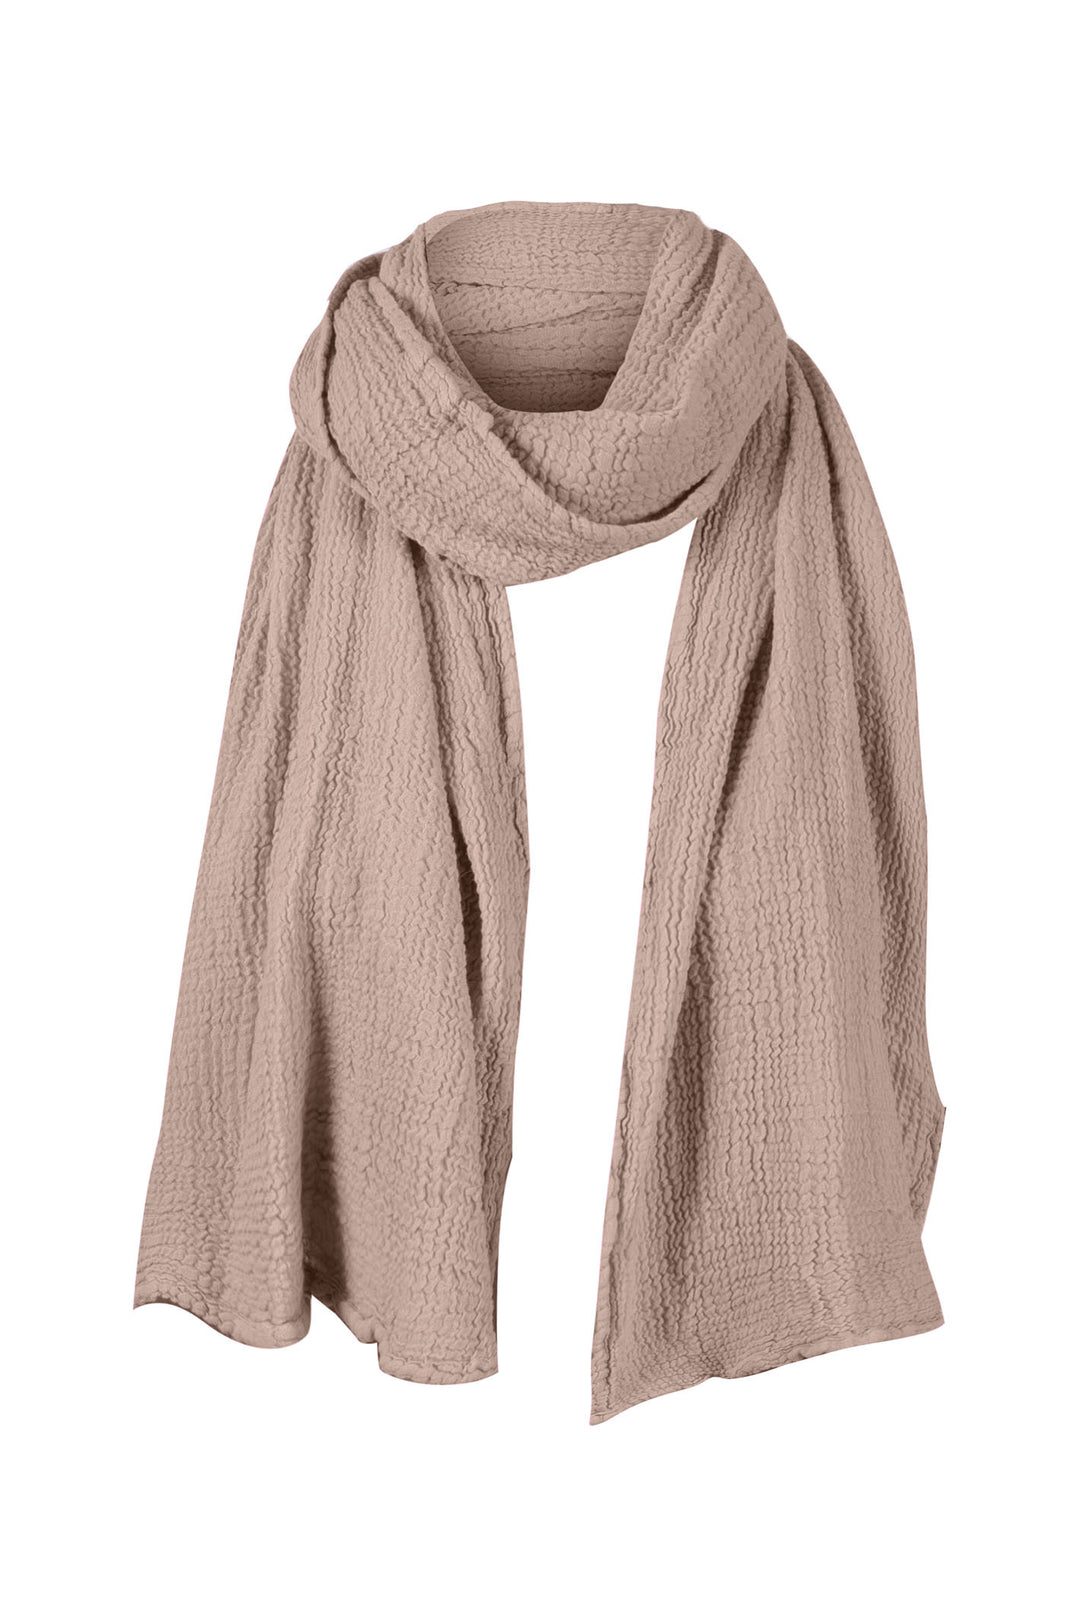 Onelife A523 Shawl Taupe Cotton Shawl - Experience Boutique